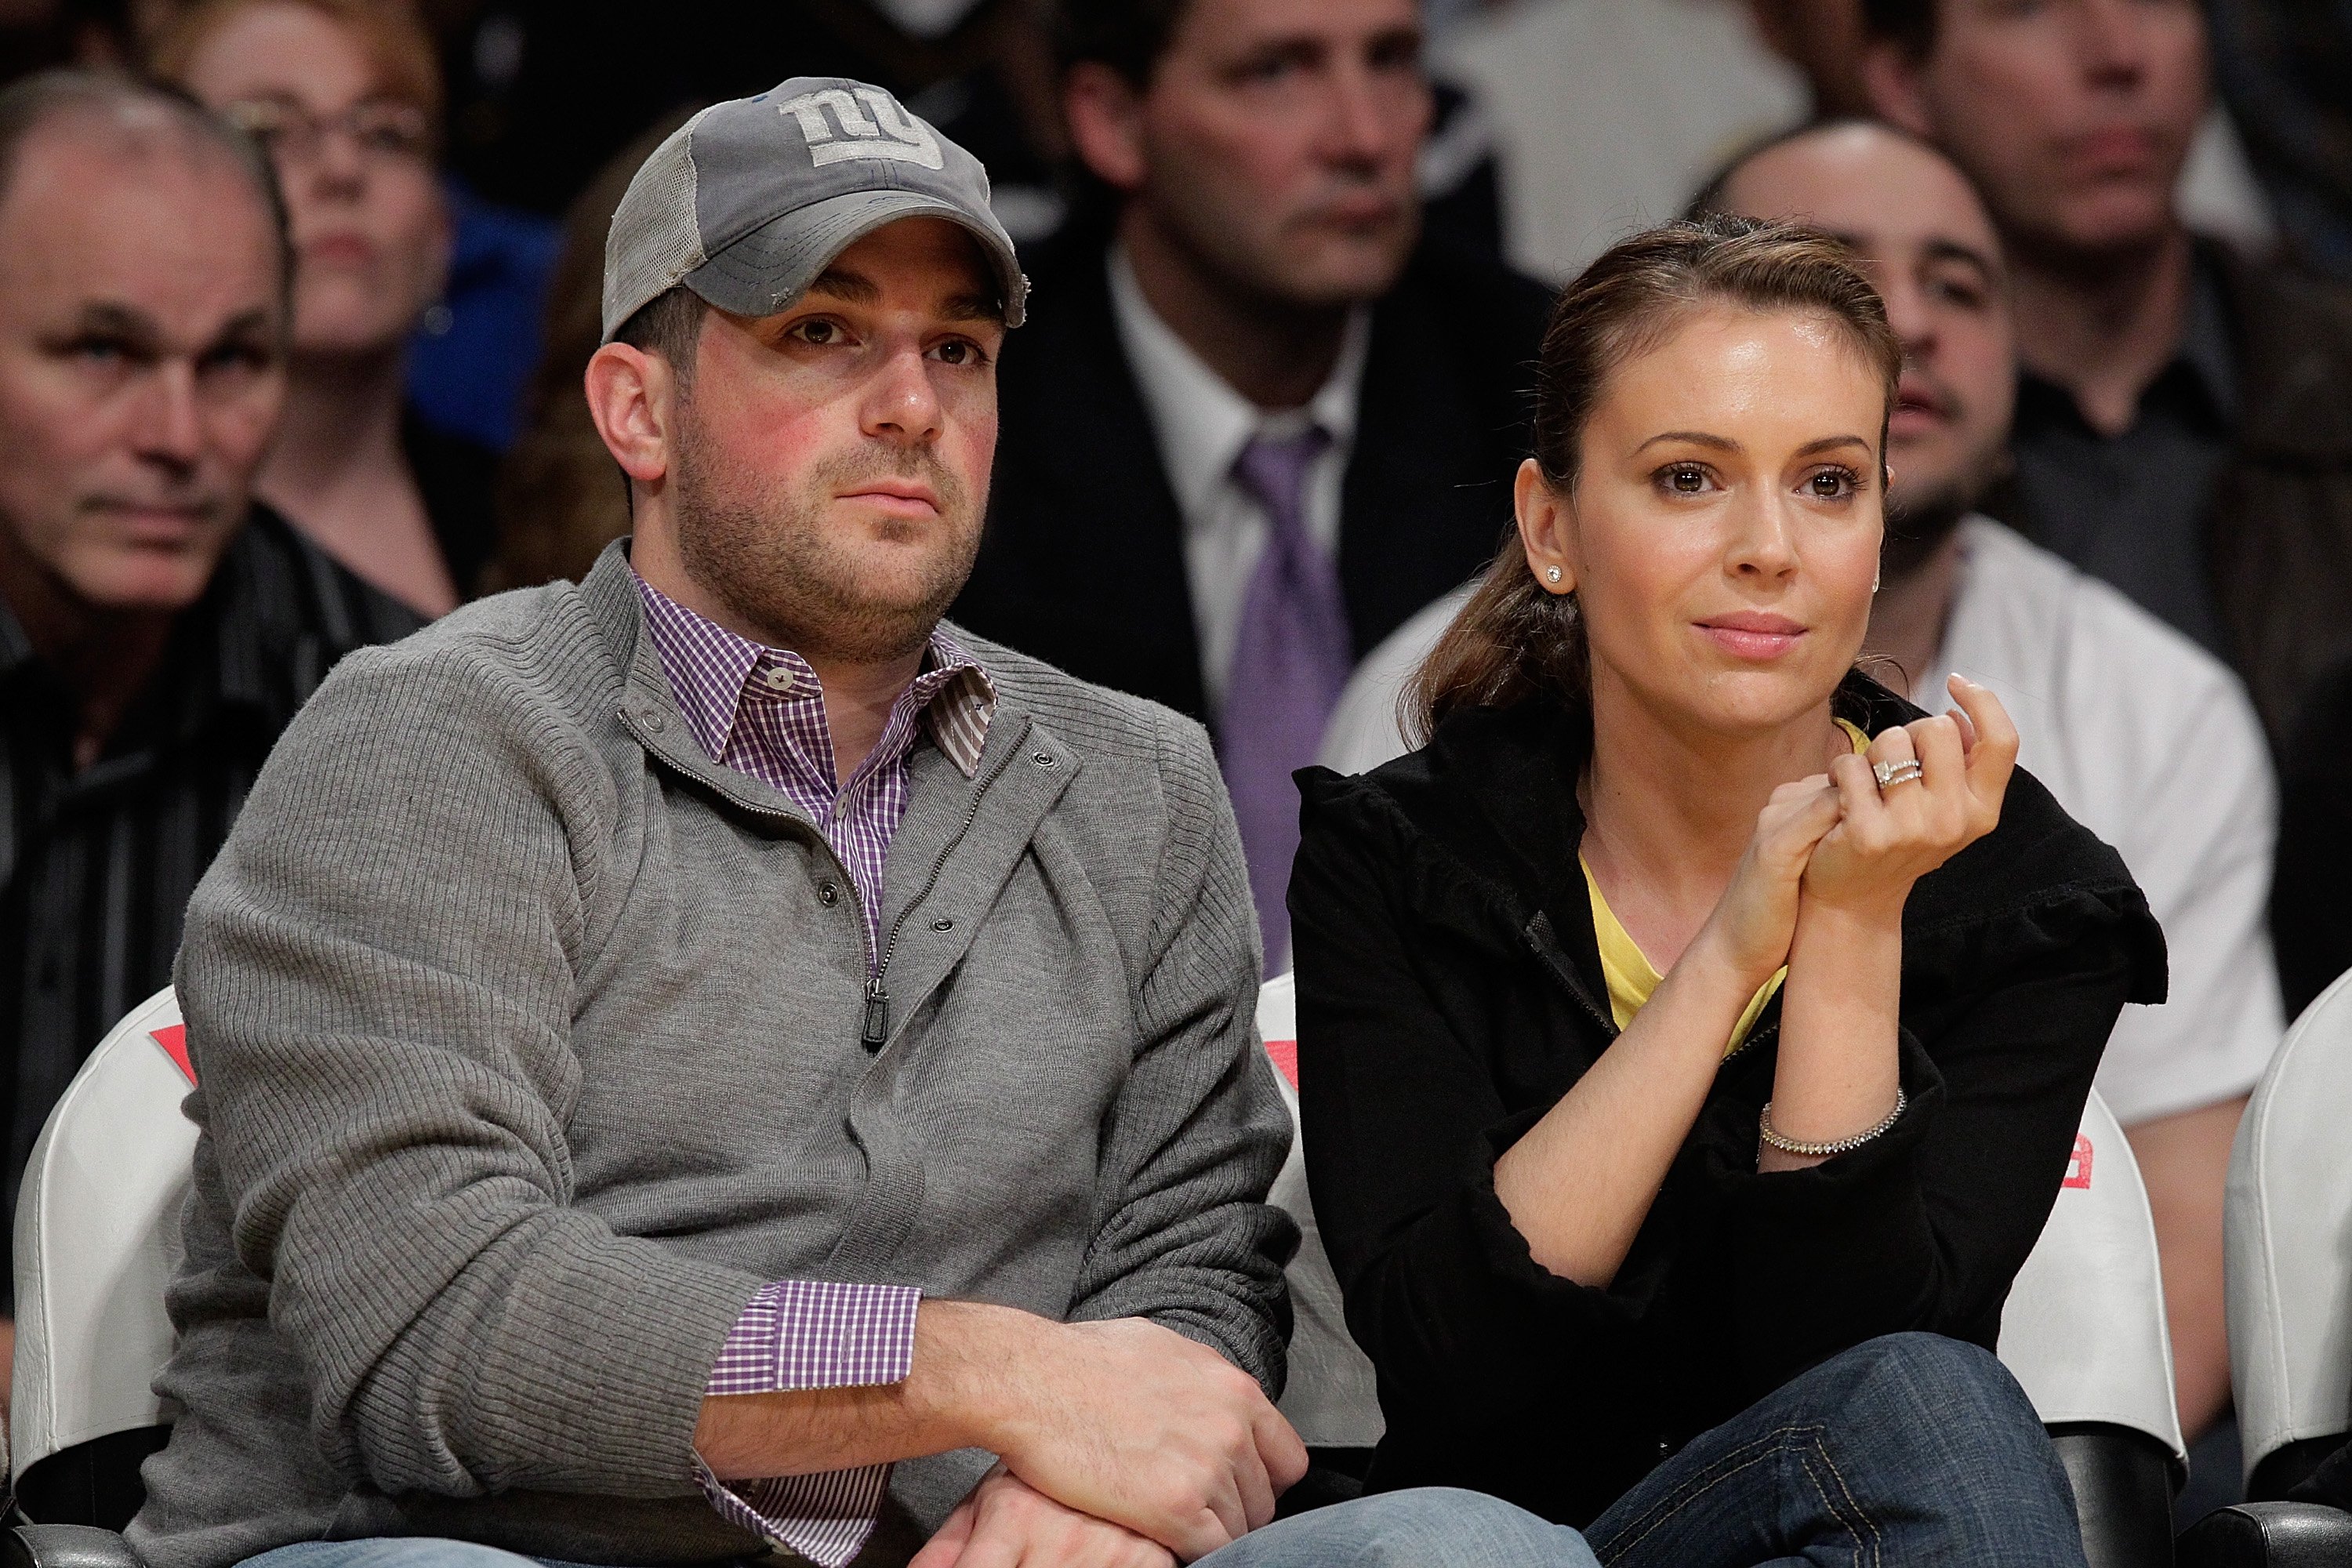  Alyssa Milano (R) and David Bugliari (L) attend a game between the Philadelphia 76ers and the Los Angeles Lakers at Staples Center on February 26, 2010, in Los Angeles, California. | Source: Getty Images